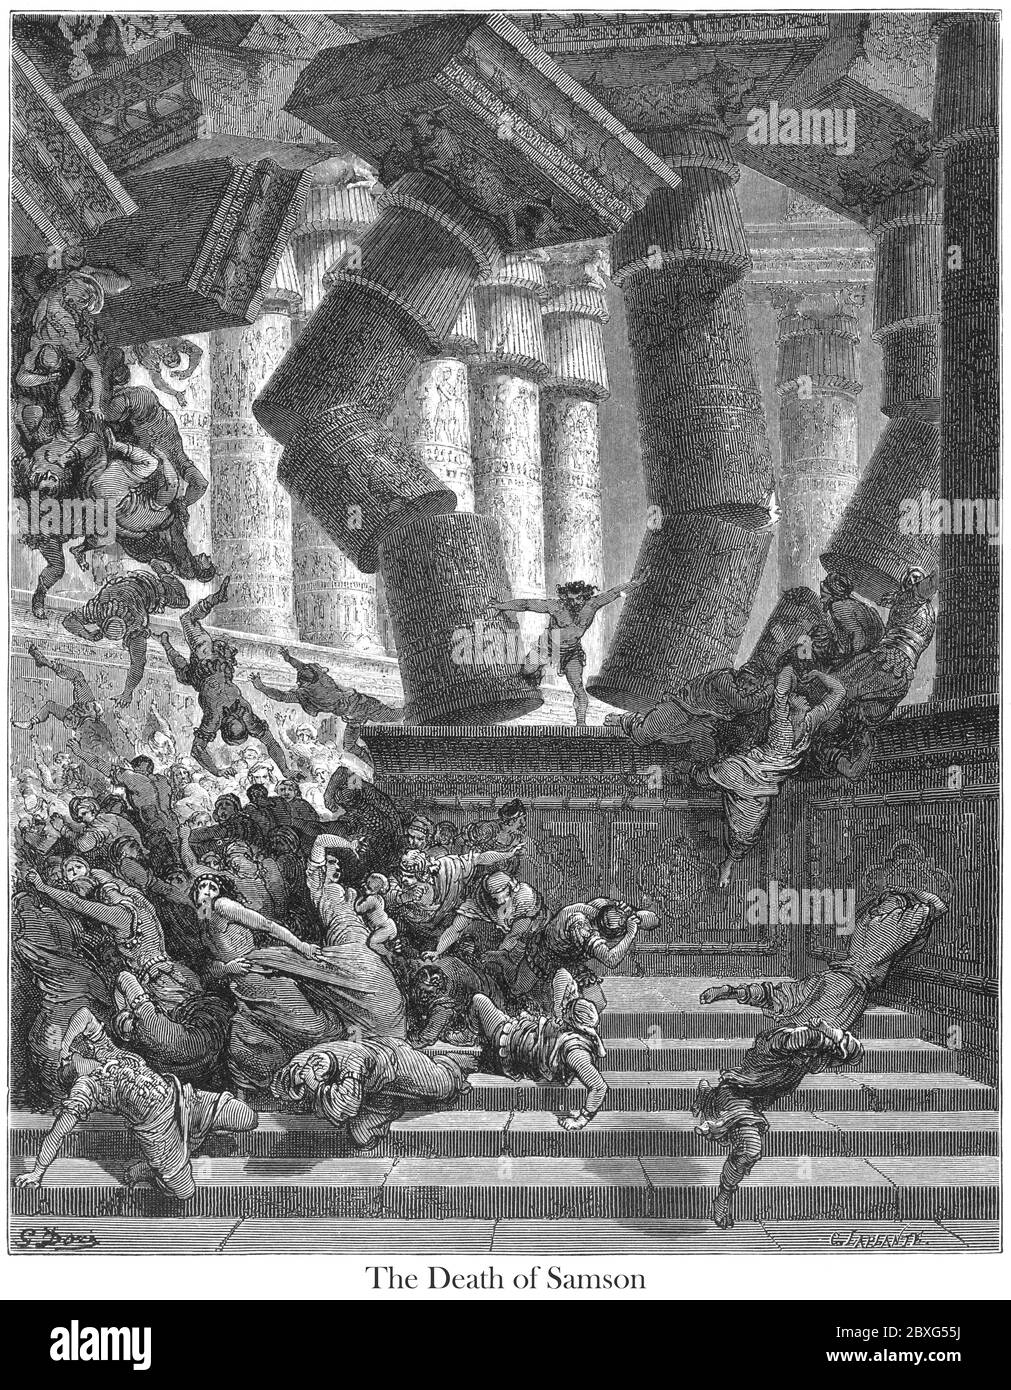 Death of Samson [Let me die with the Philistines!] Judges 16:30 From the book 'Bible Gallery' Illustrated by Gustave Dore with Memoir of Dore and Descriptive Letter-press by Talbot W. Chambers D.D. Published by Cassell & Company Limited in London and simultaneously by Mame in Tours, France in 1866 Stock Photo